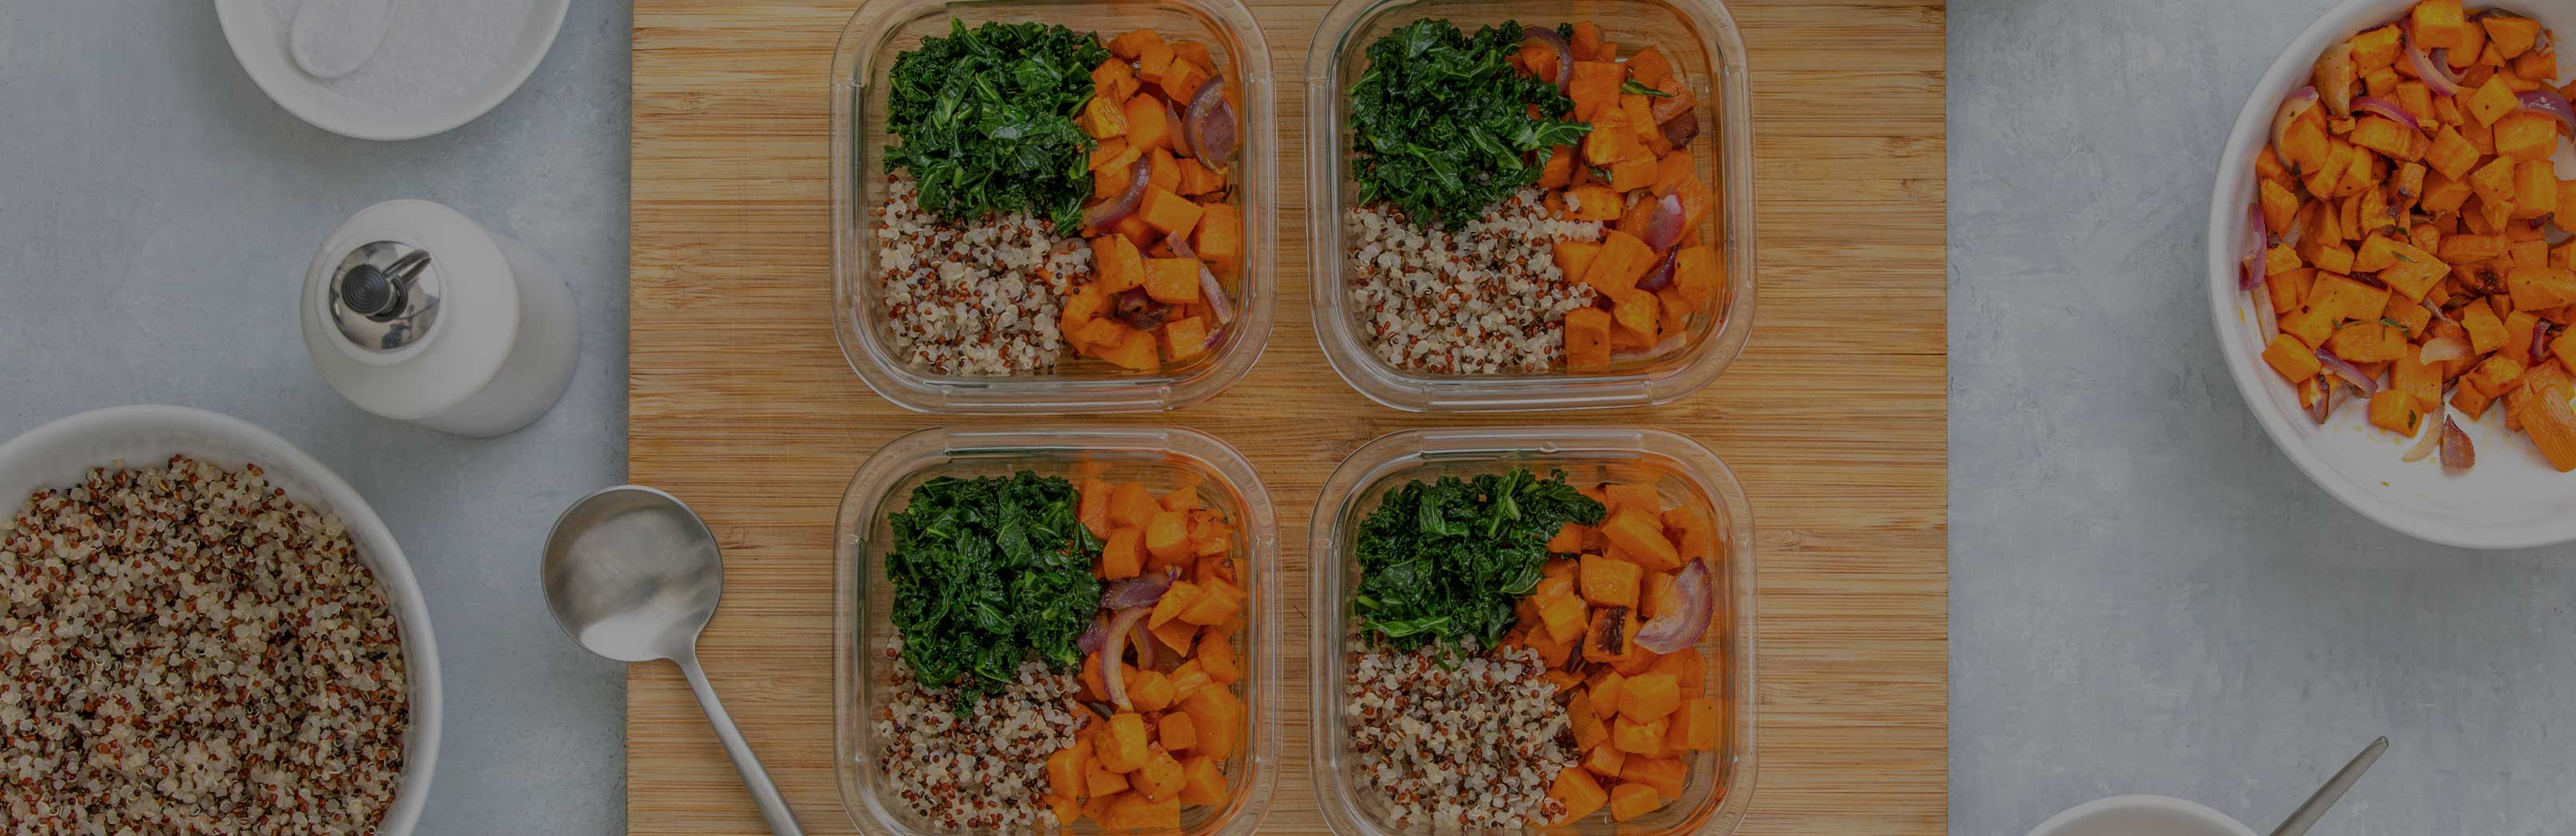 Top 5 Tips to Improve Your Meal Prep